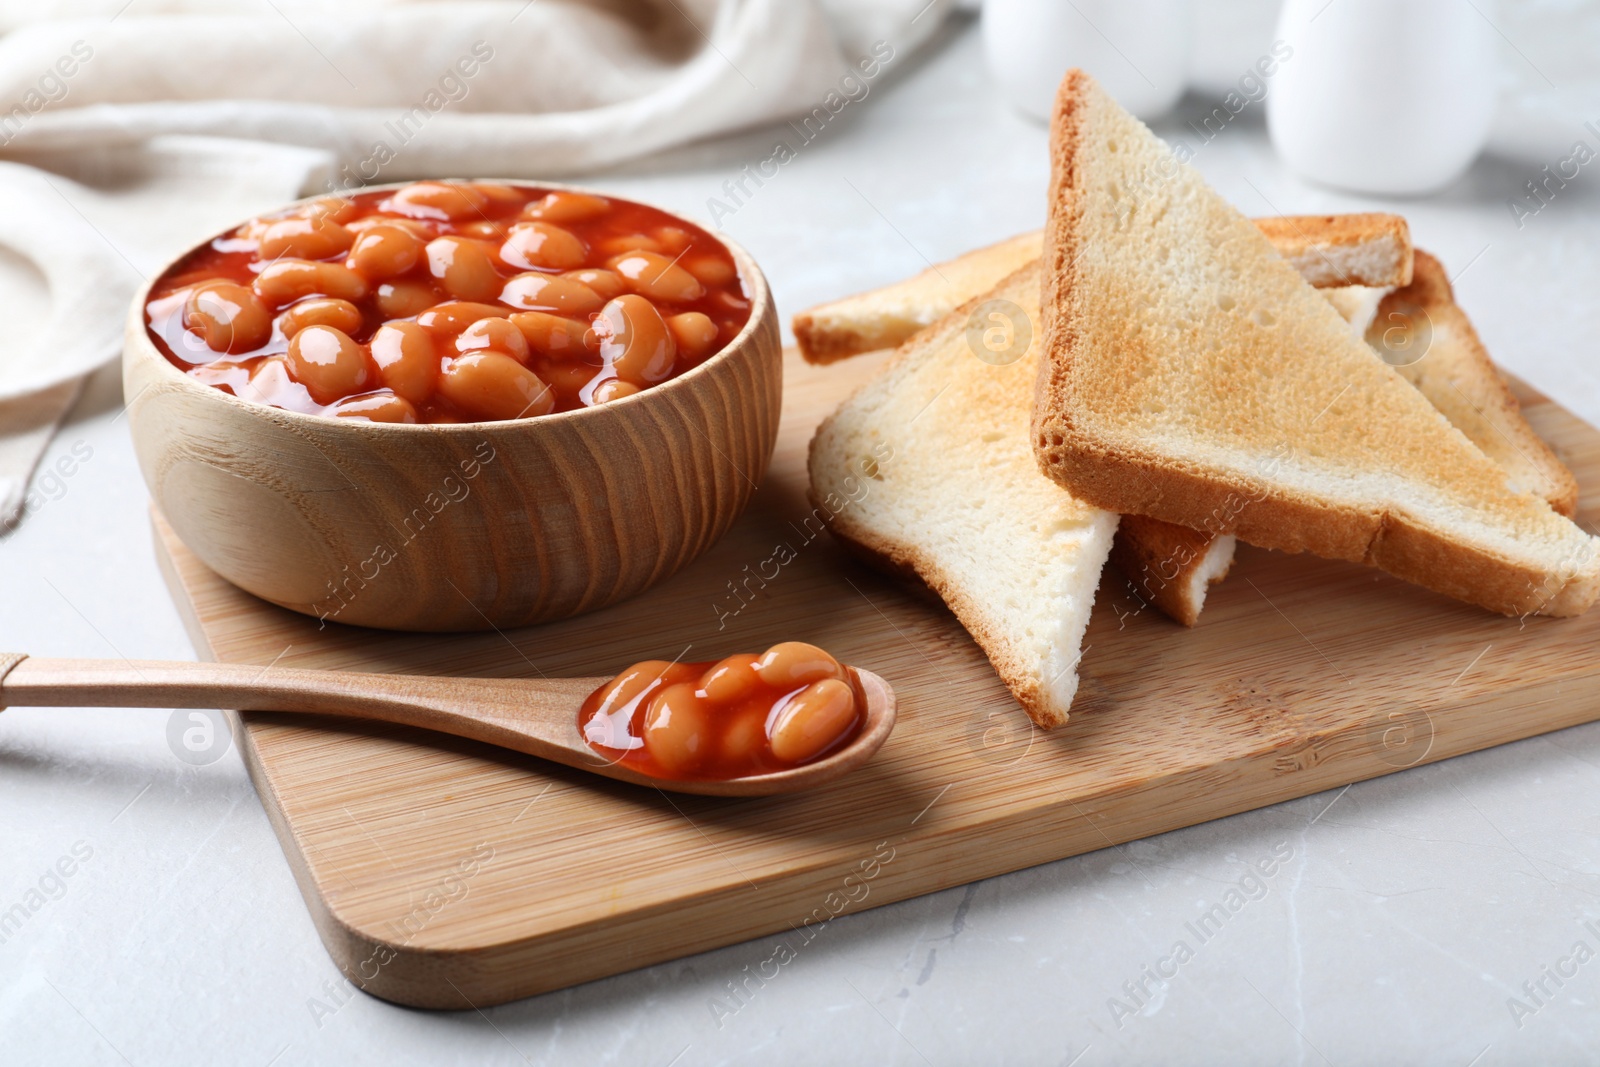 Photo of Toasts and delicious canned beans on white table